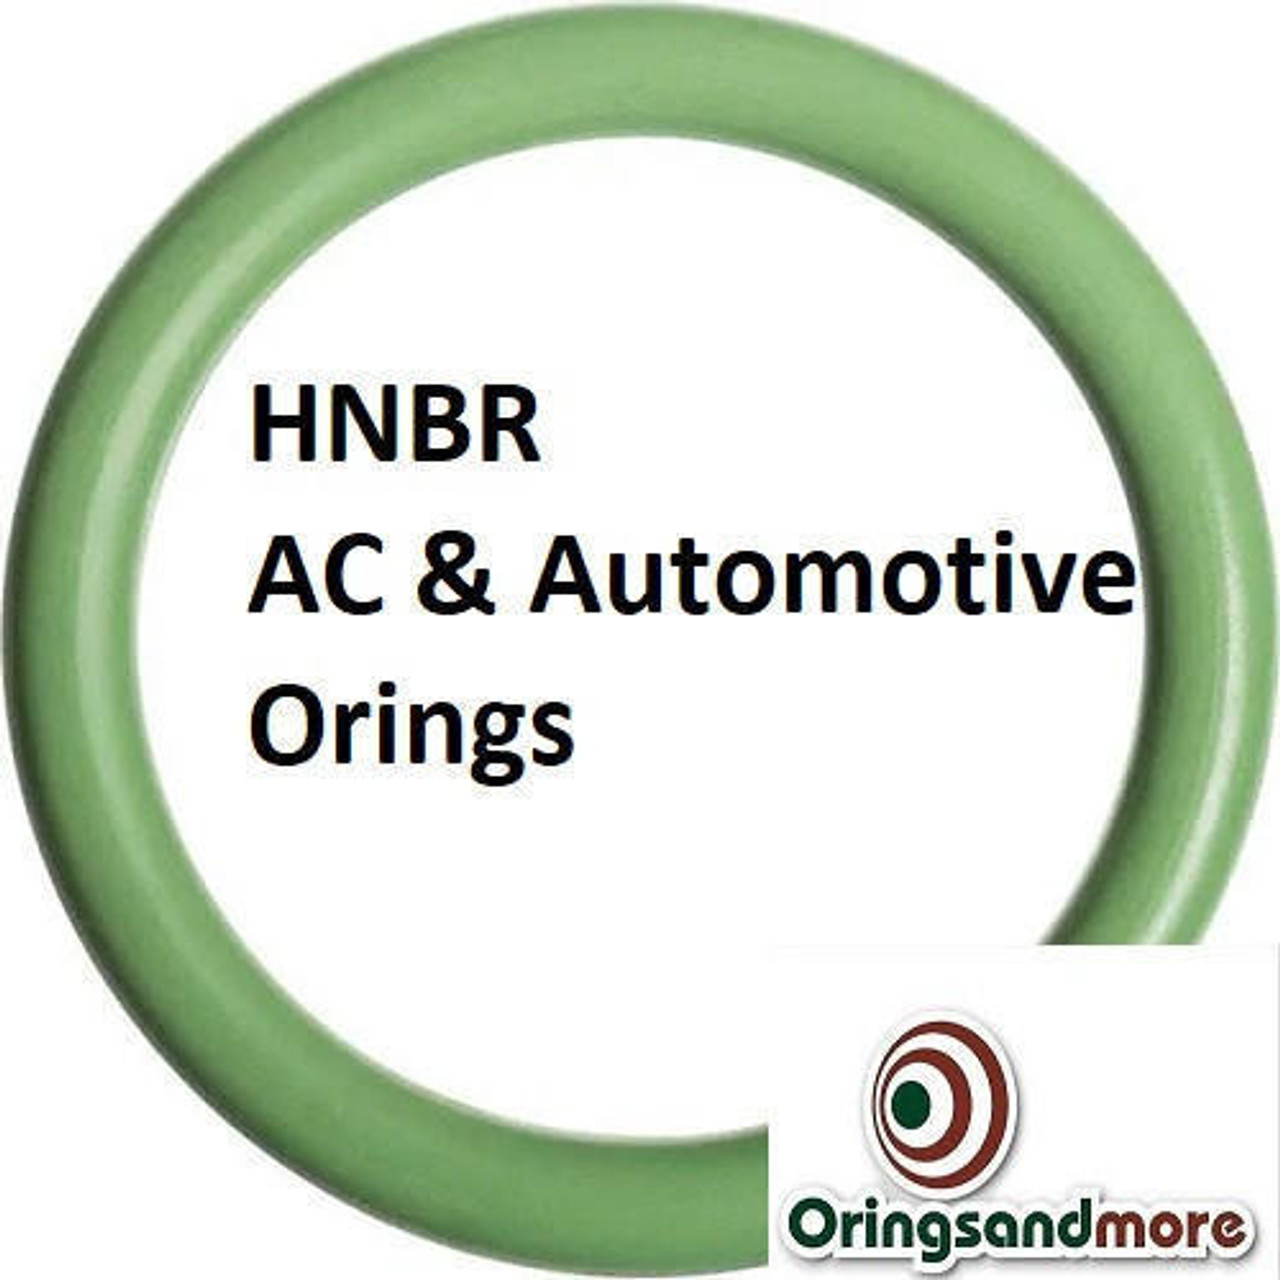 HNBR Orings  # 177-70D Green Price for 1 pc